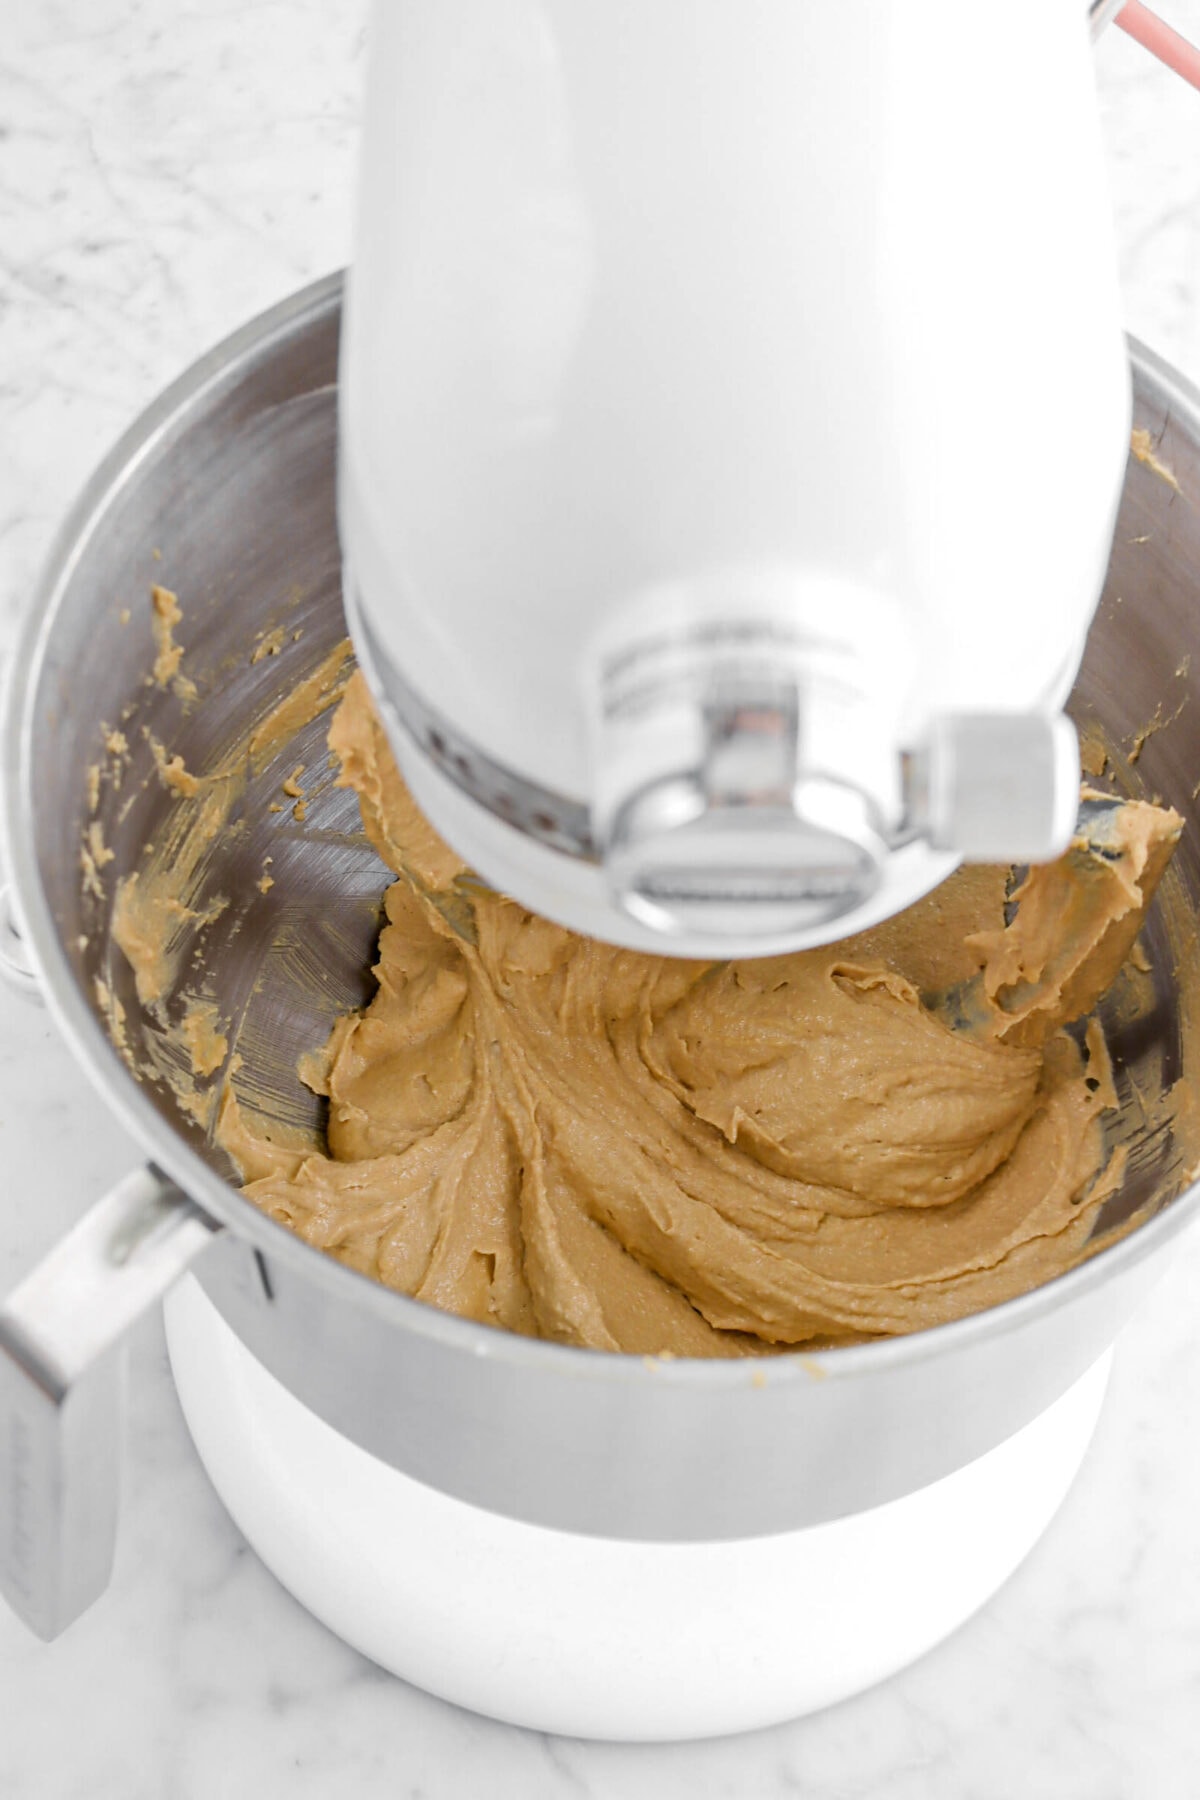 peanut butter and butter mixture in stand mixer.